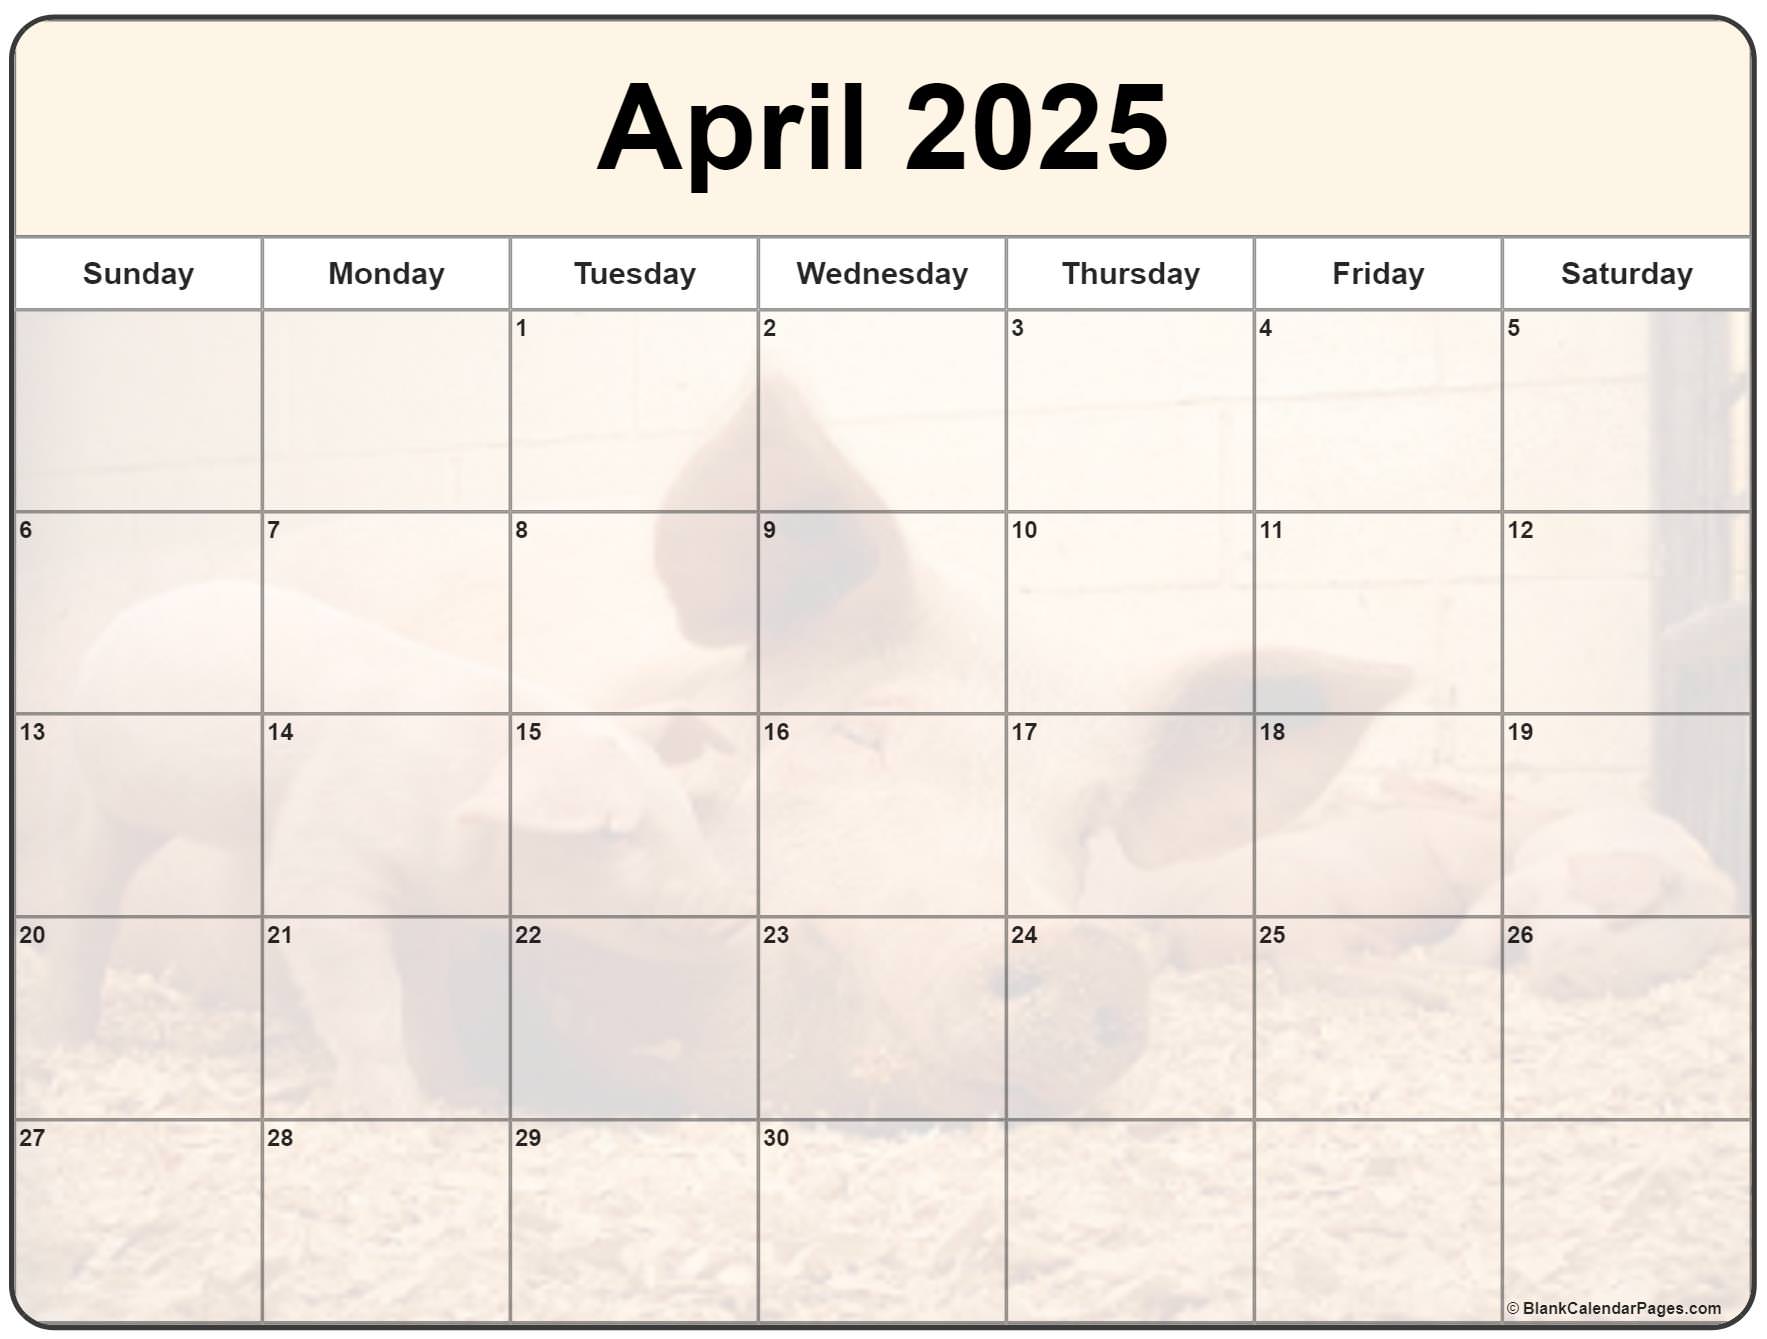 Collection of April 2025 photo calendars with image filters.